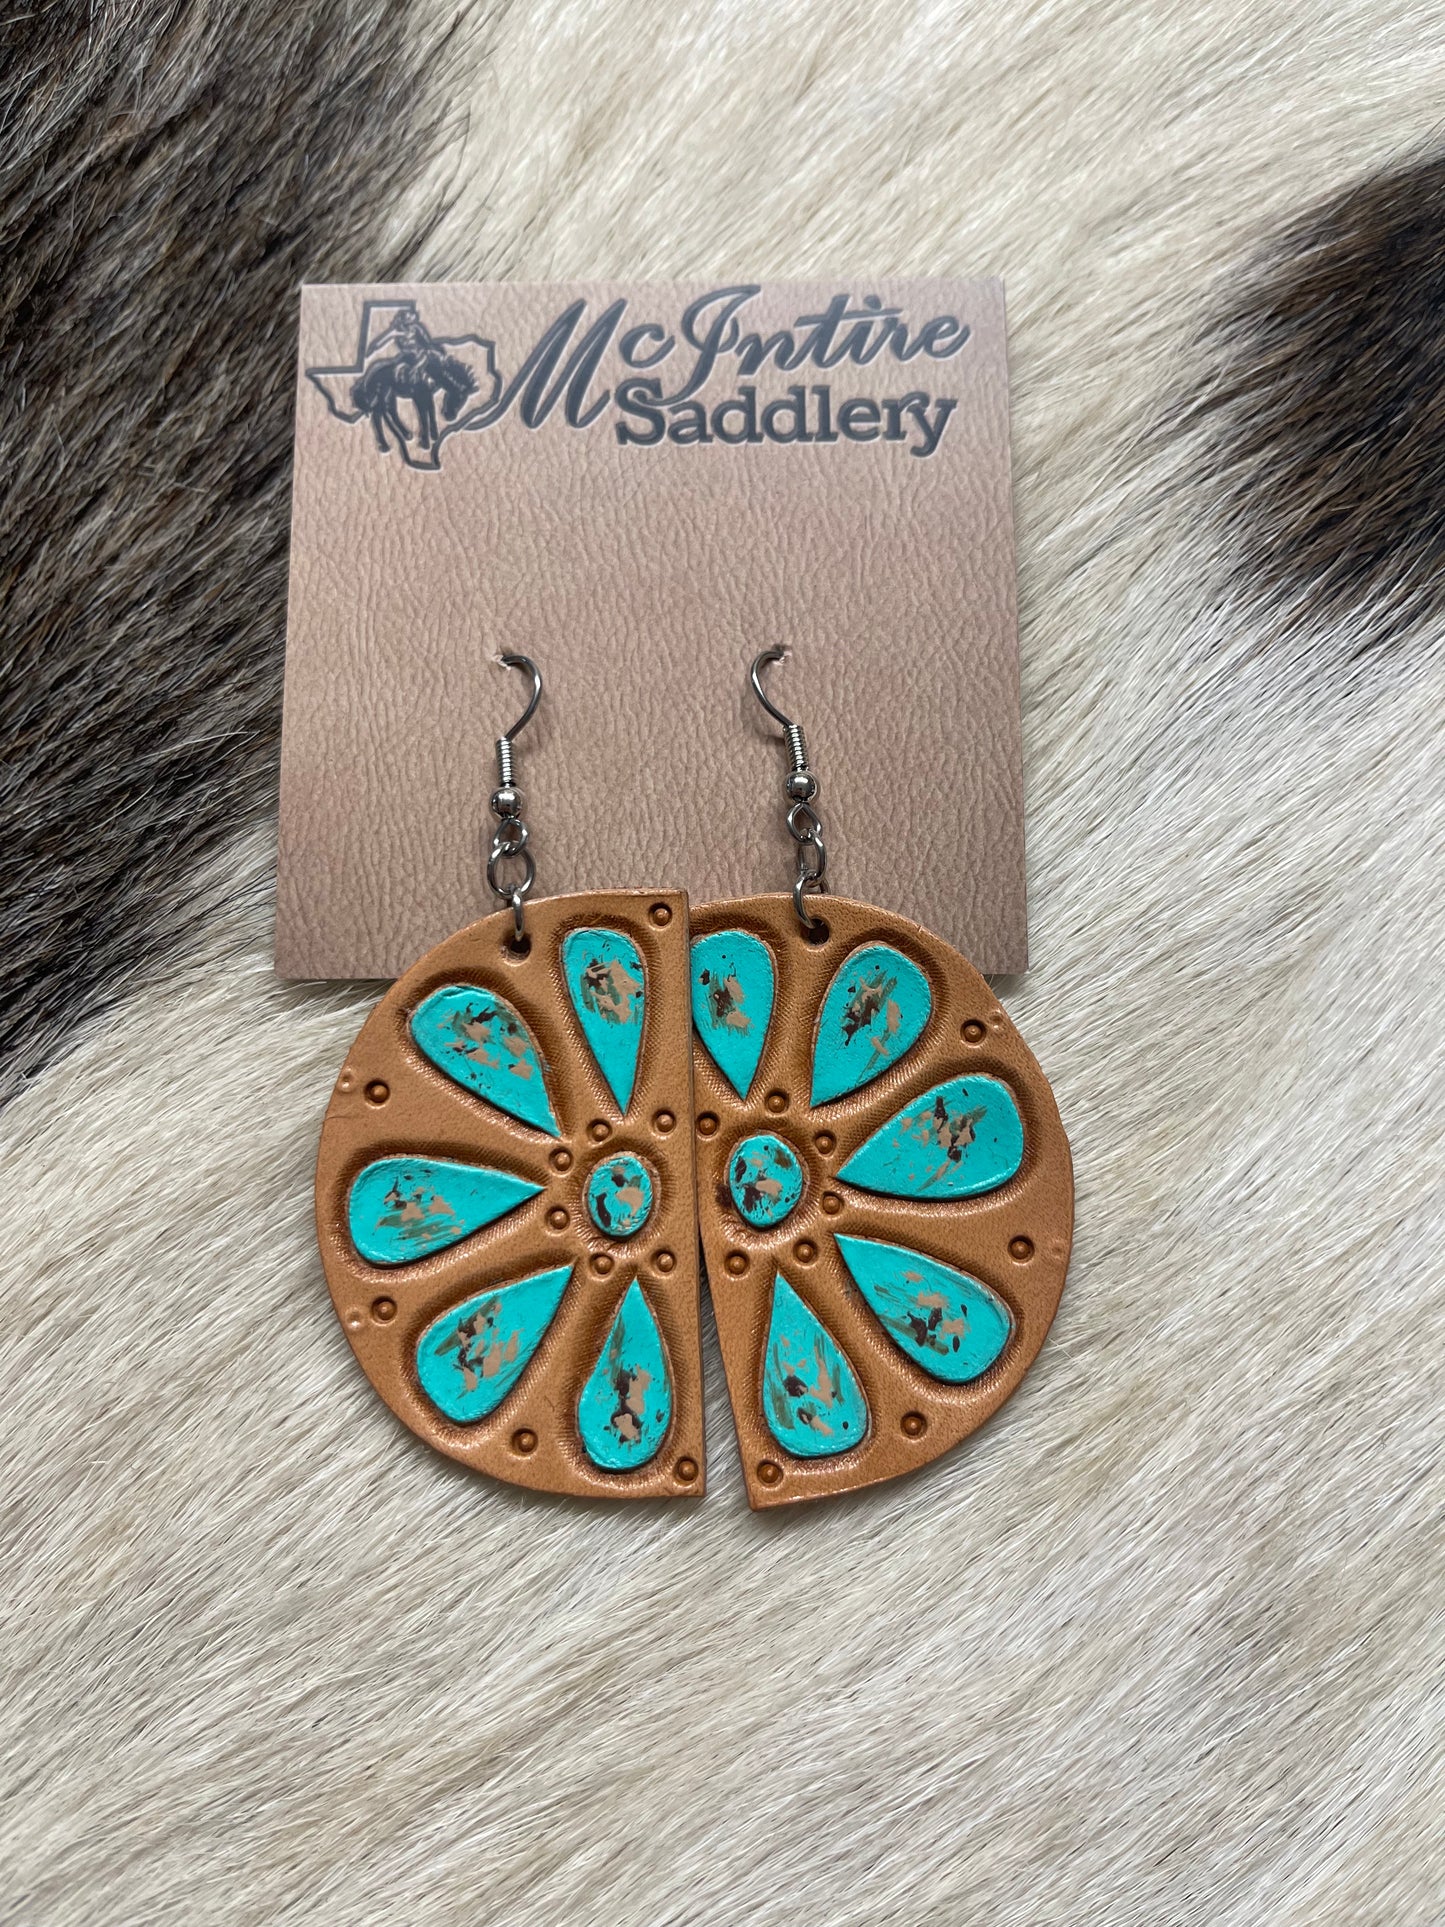 The Turquoise Stone Flower Earrings